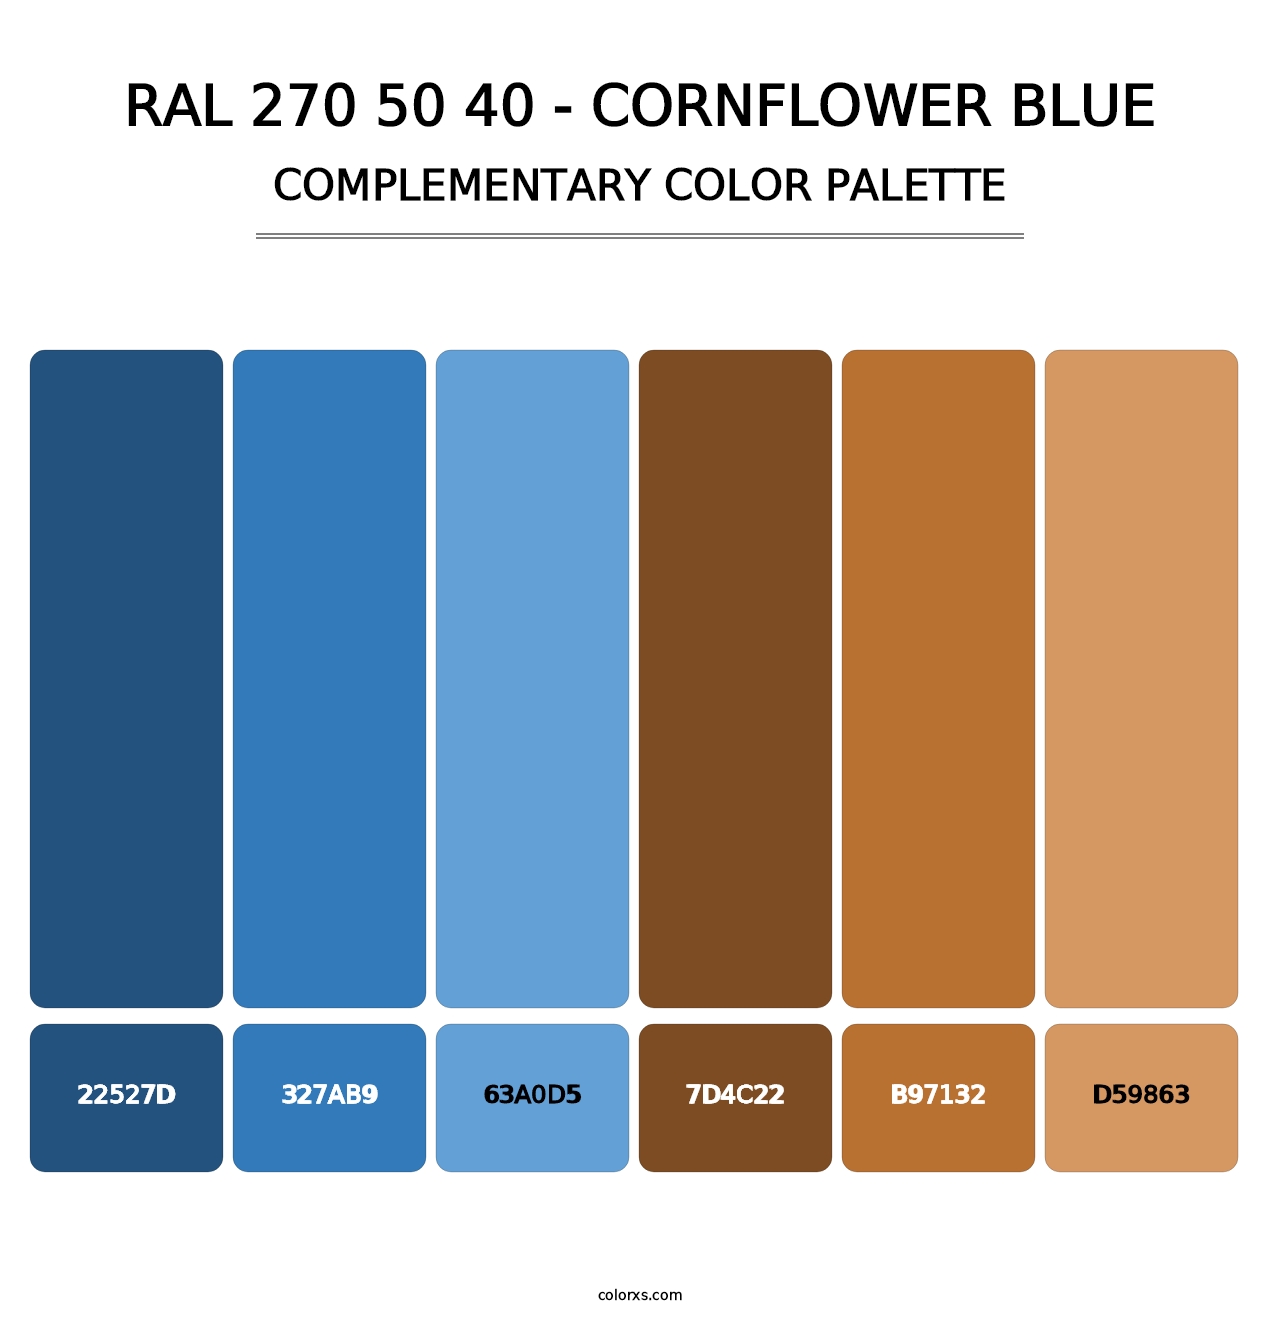 RAL 270 50 40 - Cornflower Blue - Complementary Color Palette